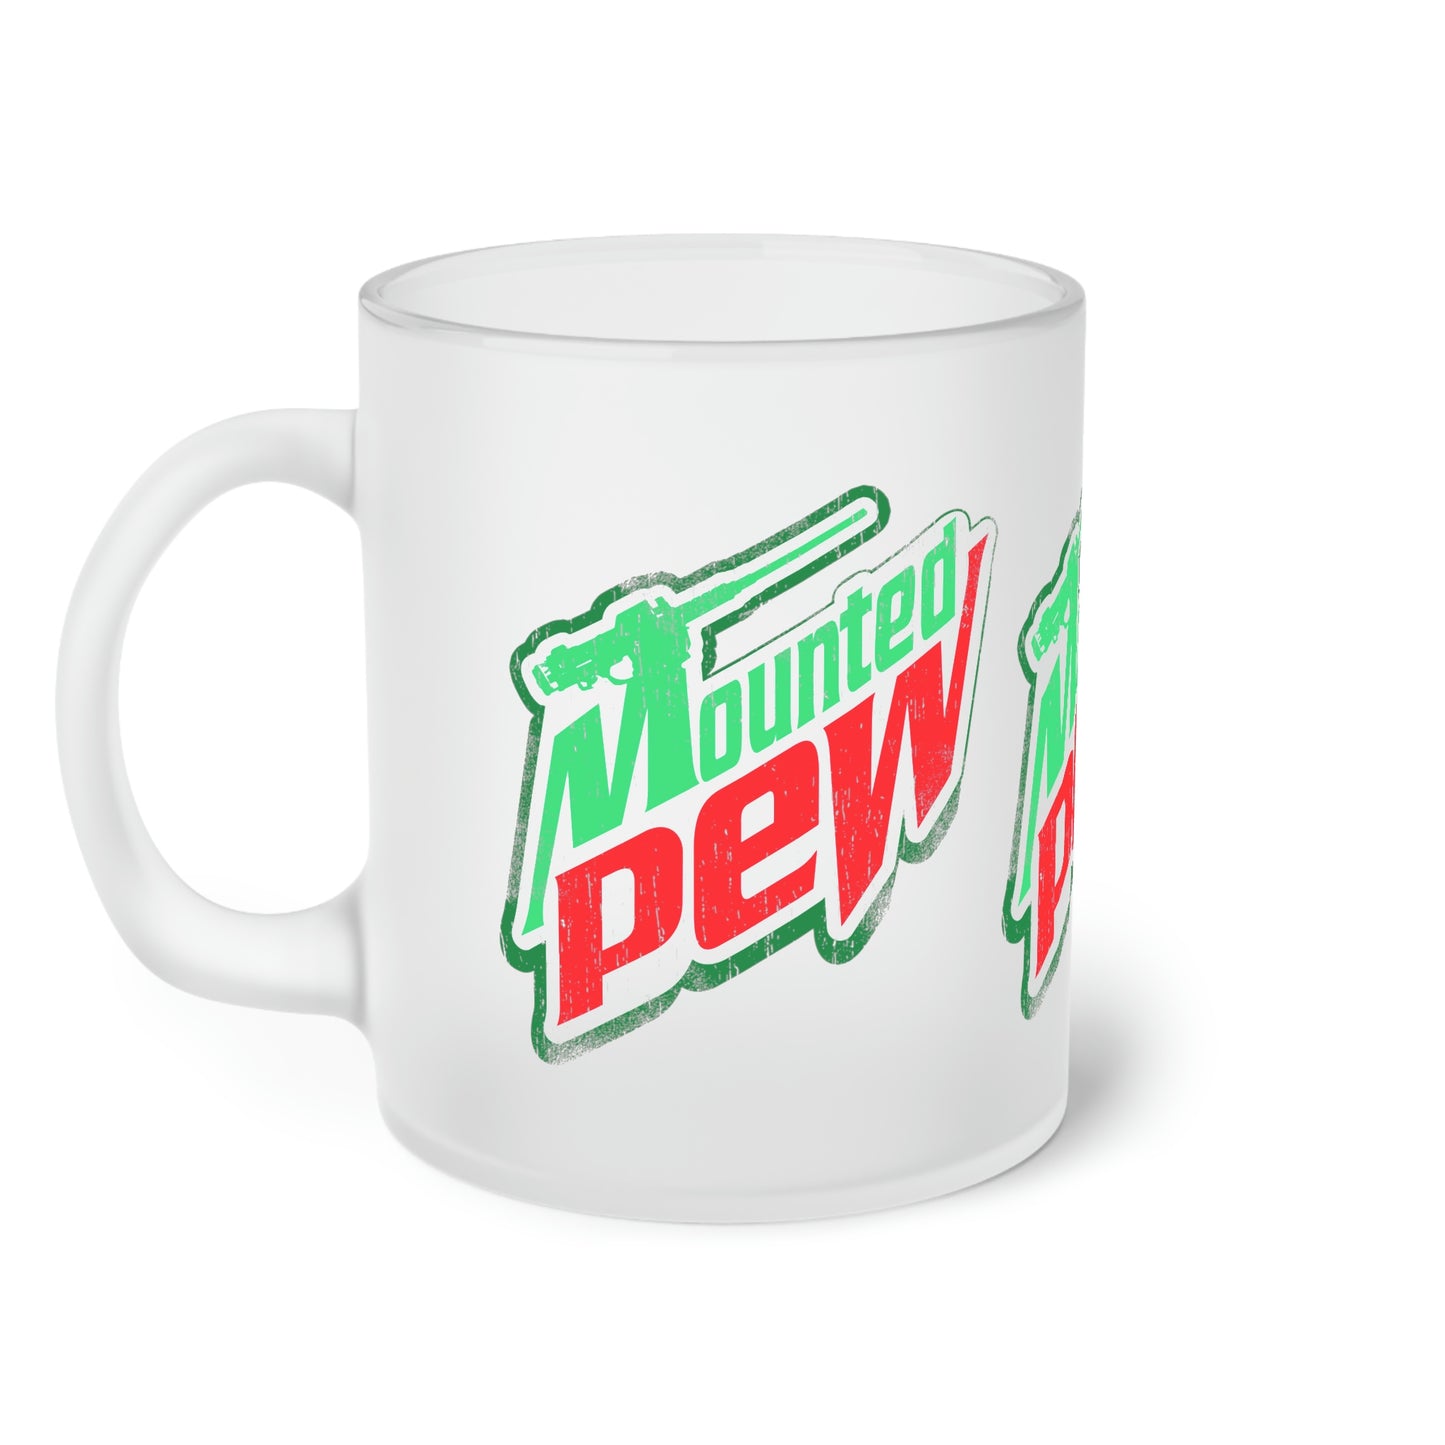 Mounted Pew Frosted Glass Mug